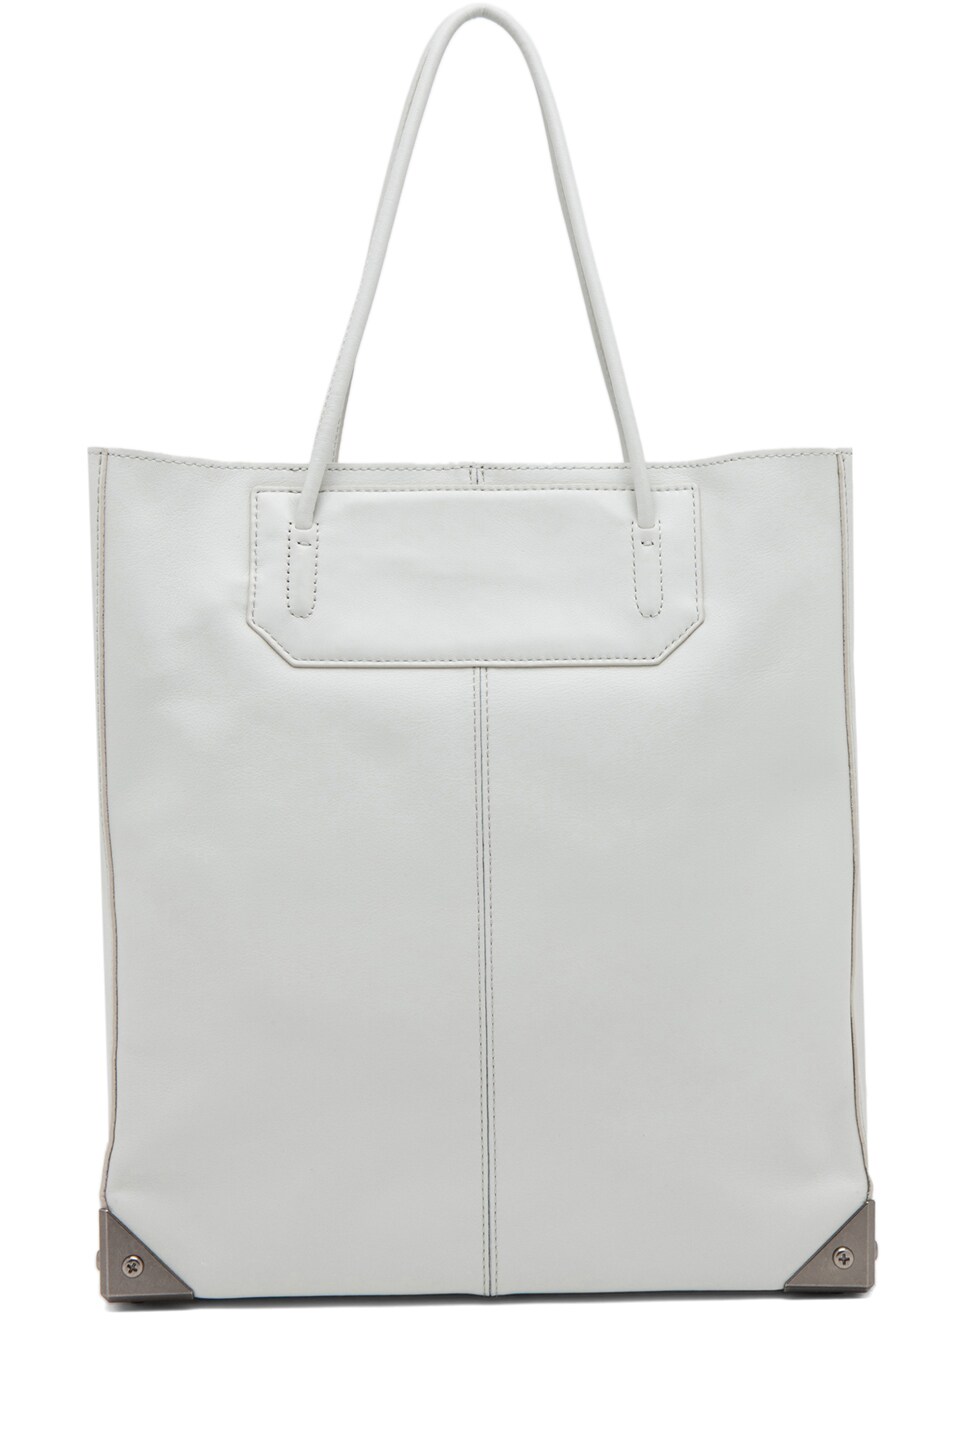 Image 1 of Alexander Wang Prisma Tote in Parchment